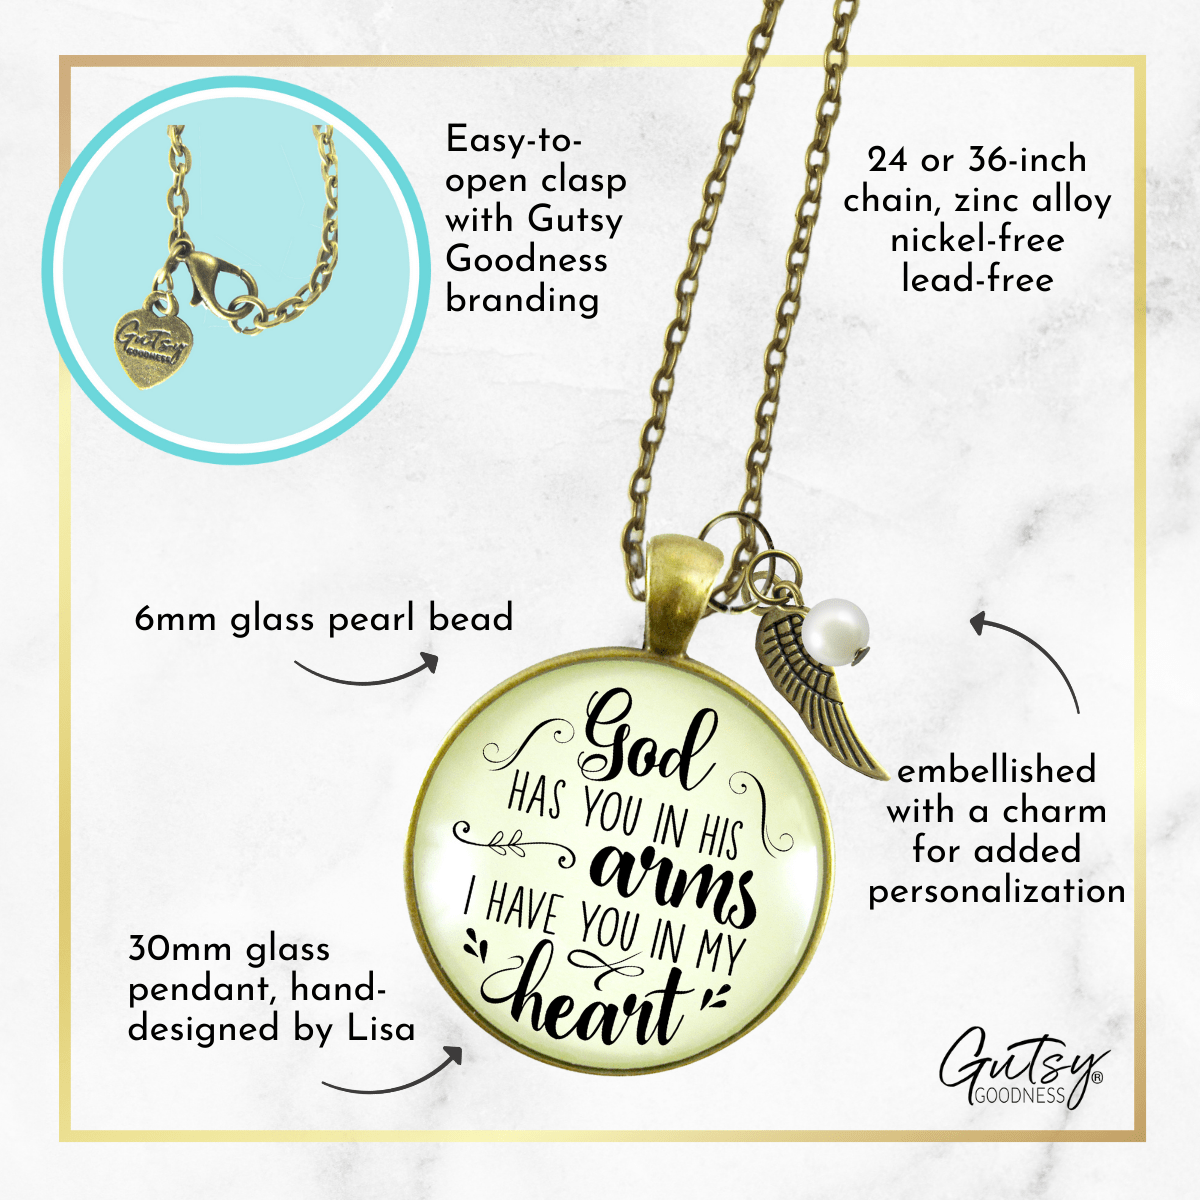 Gutsy Goodness God Has You in His Arms Memorial Necklace Jewelry Angel Wing Charm - Gutsy Goodness Handmade Jewelry;God Has You In His Arms Memorial Necklace Jewelry Angel Wing Charm - Gutsy Goodness Handmade Jewelry Gifts